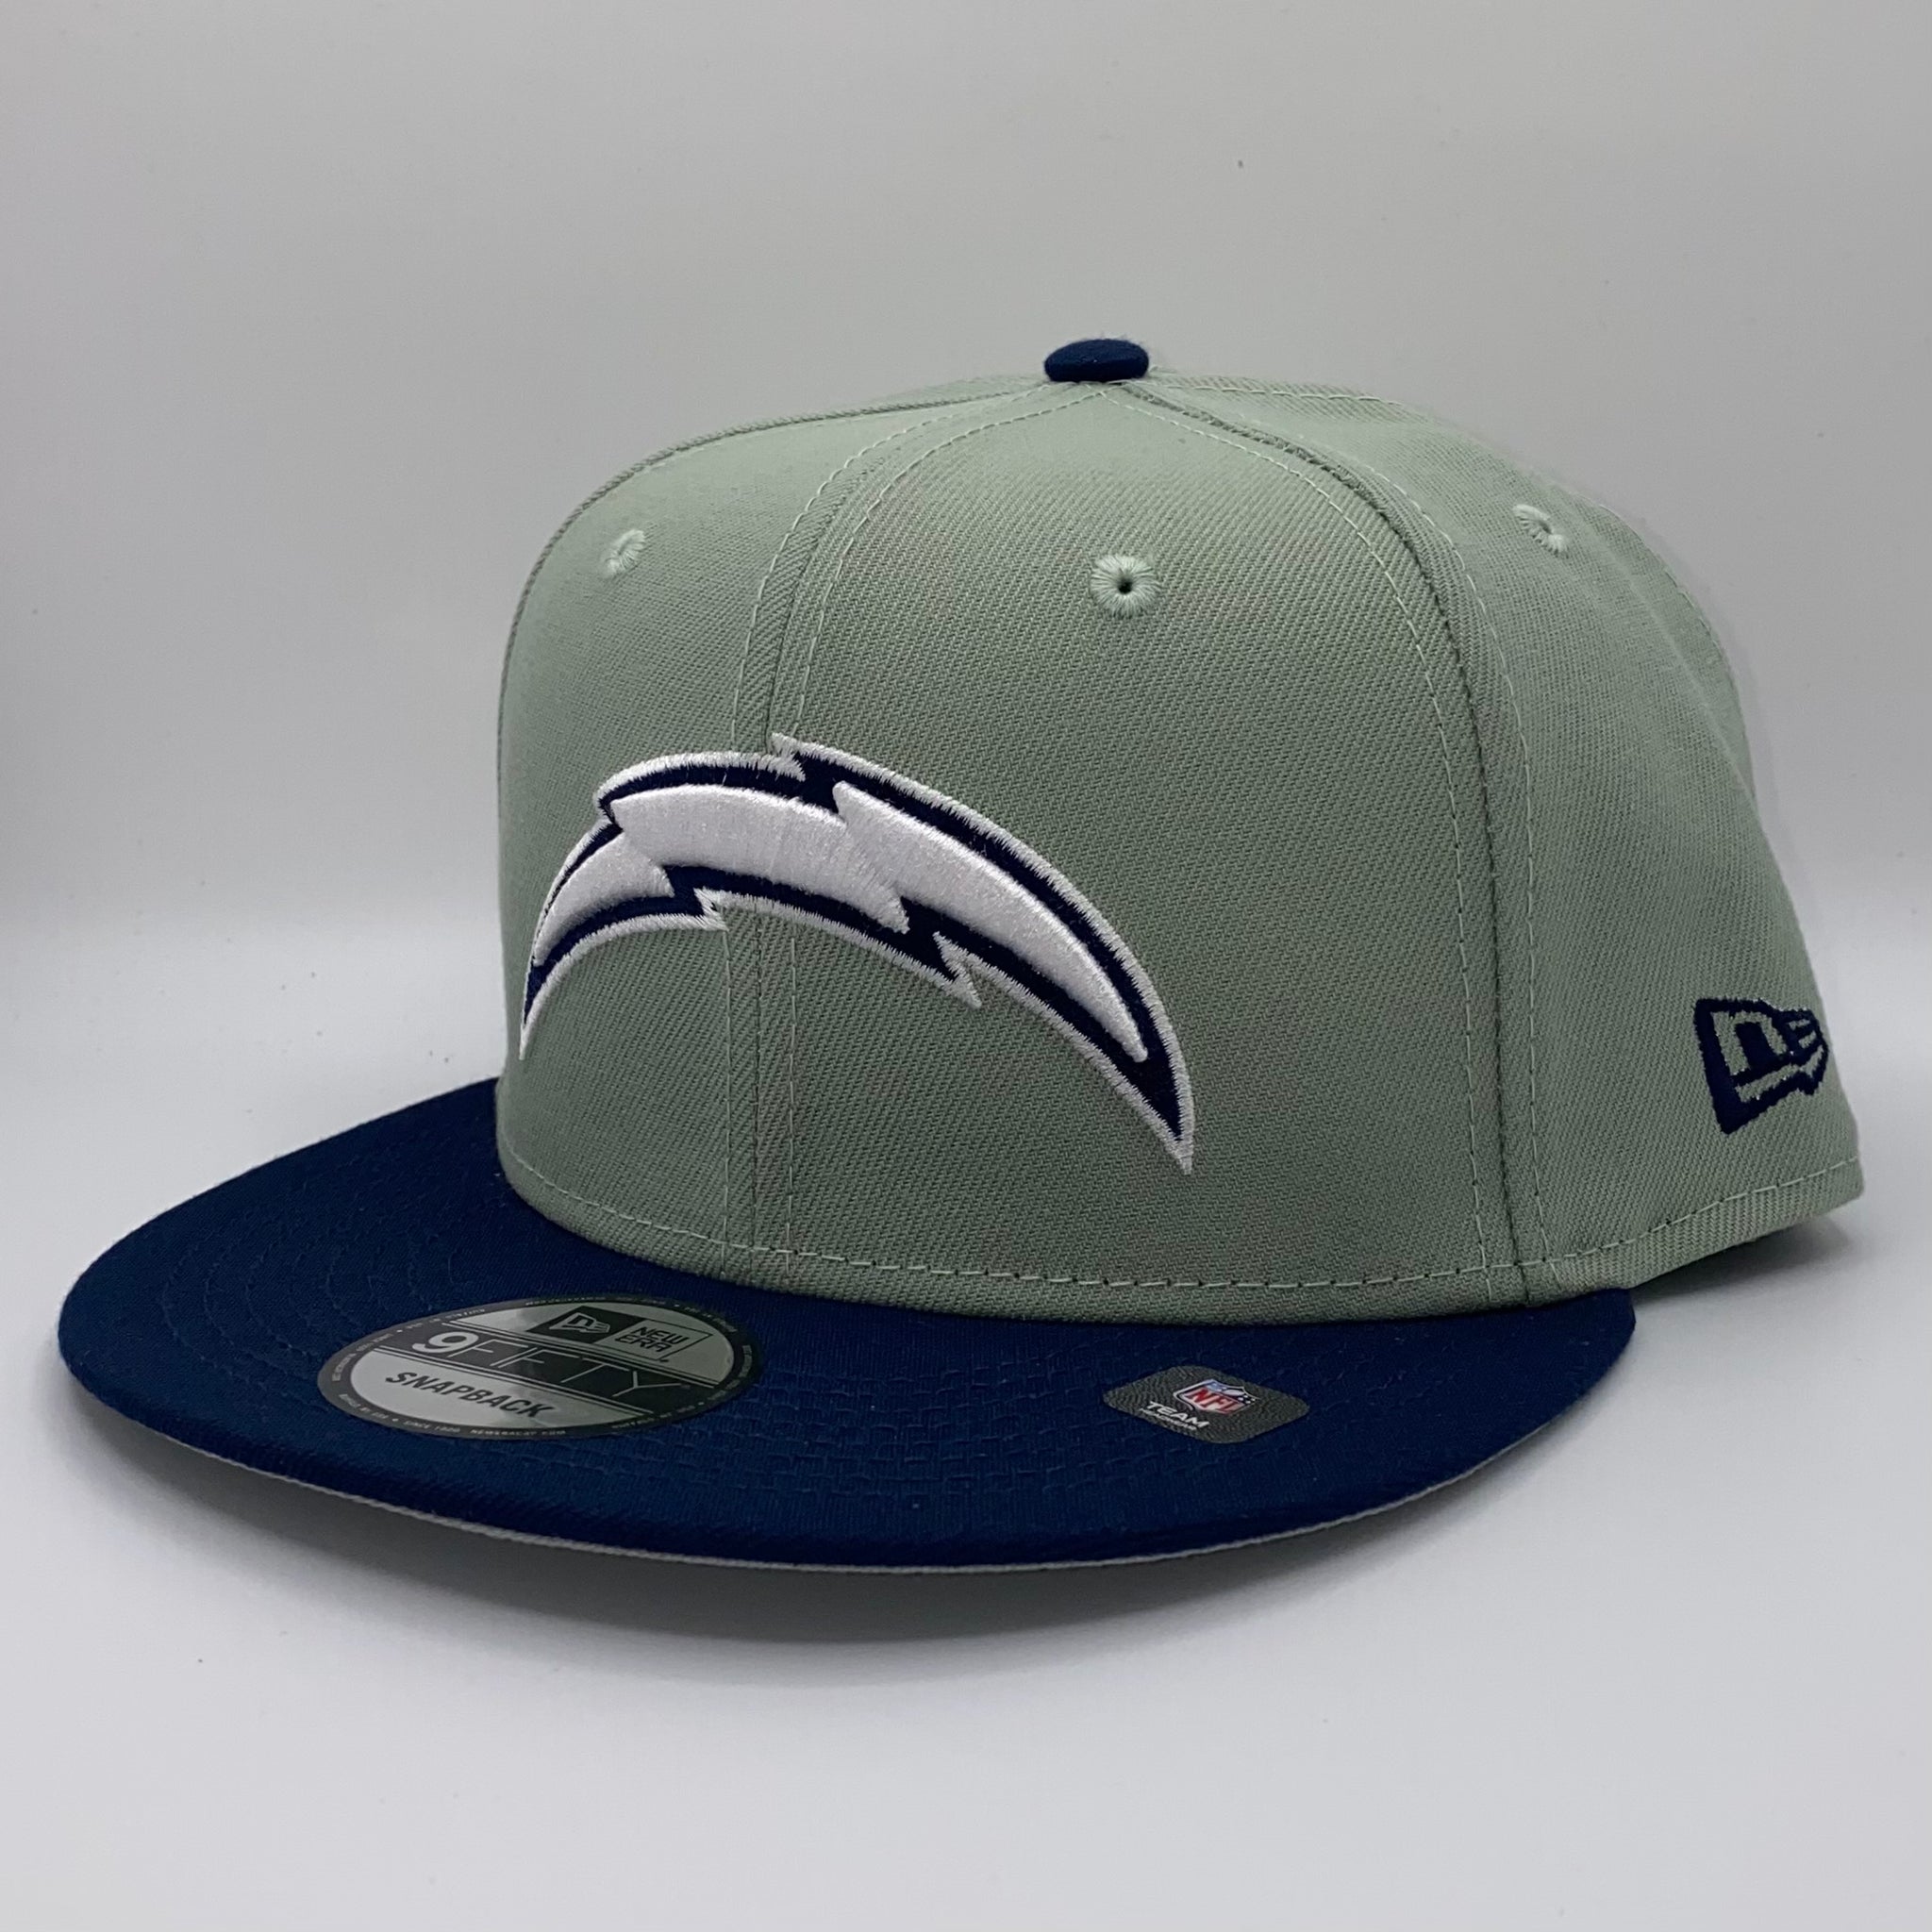 Los Angeles Chargers 2Tone Color Pack 9FIFTY Snapback Hat - Navy/Cardinals